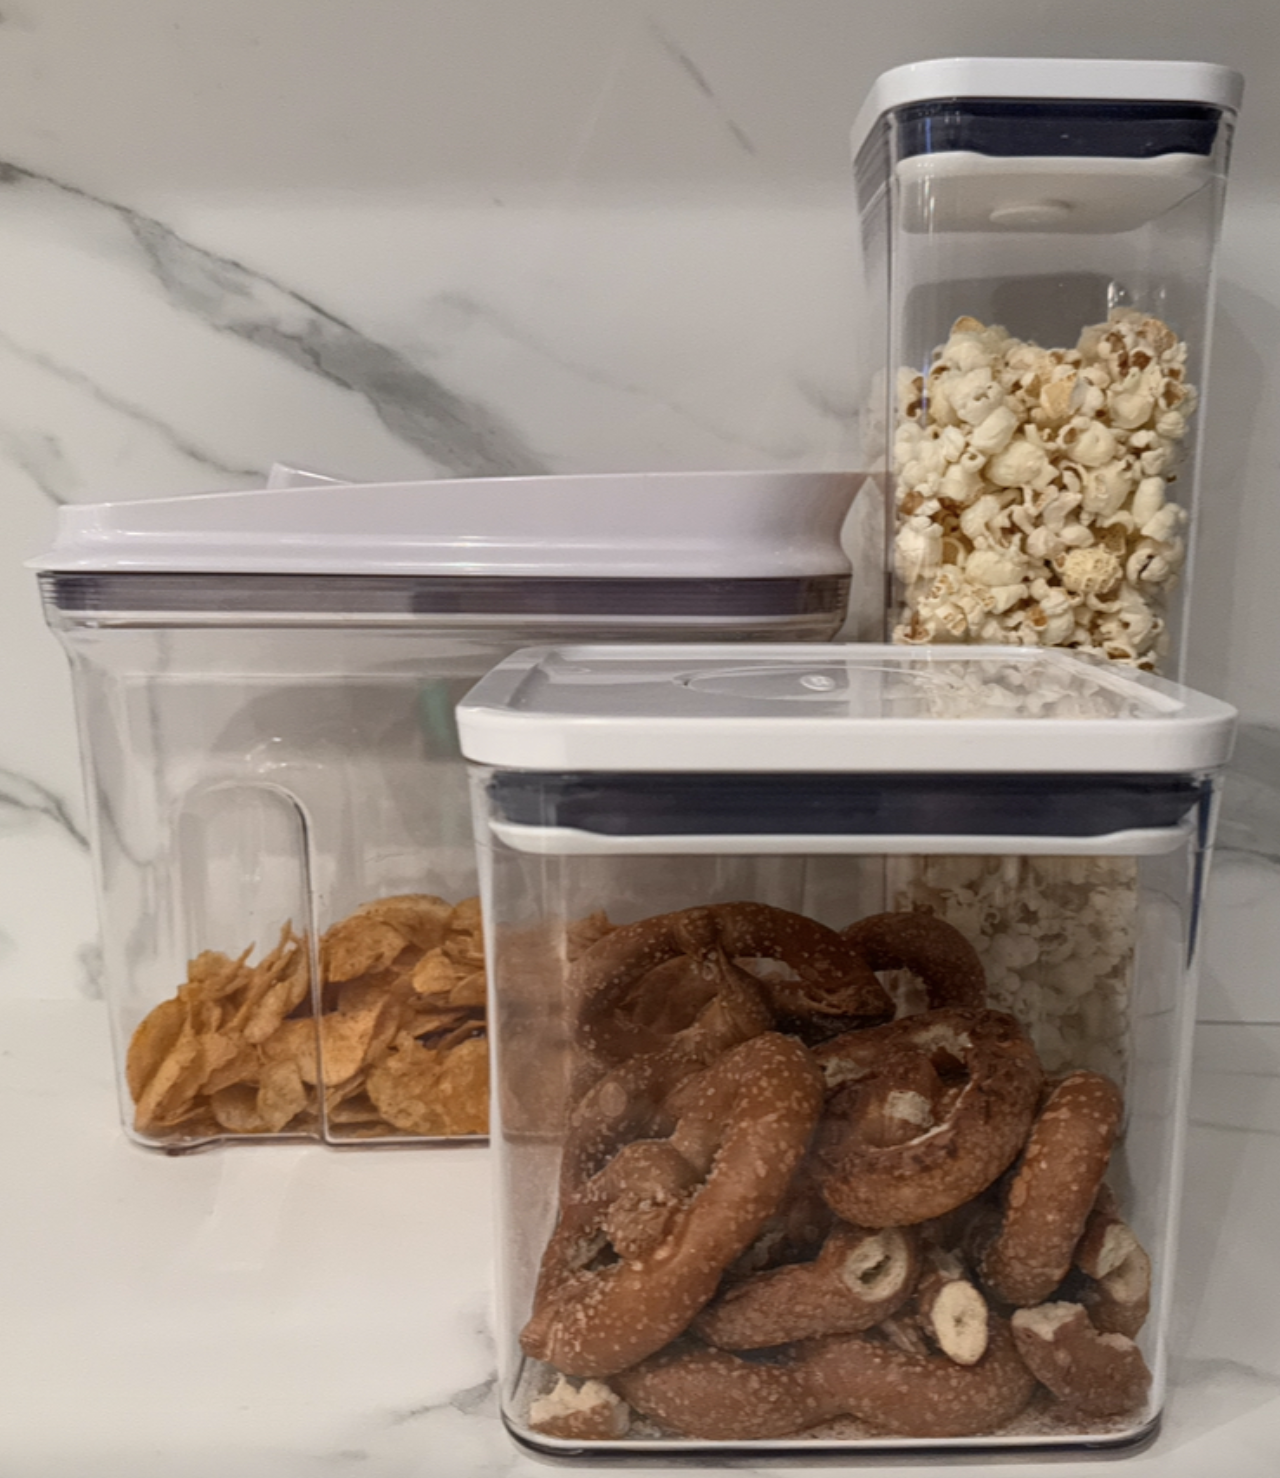 Having emergency snacks in your dorm is a must, especially if you get hungry outside of regular dining hours. Popcorn is a popular snack for college students as it relatively low in calories and has a generous expiration date. Pretzels are another good option as they satisfy the salty and crunchy craving, and do not have an unpleasant odor that disrupt others.